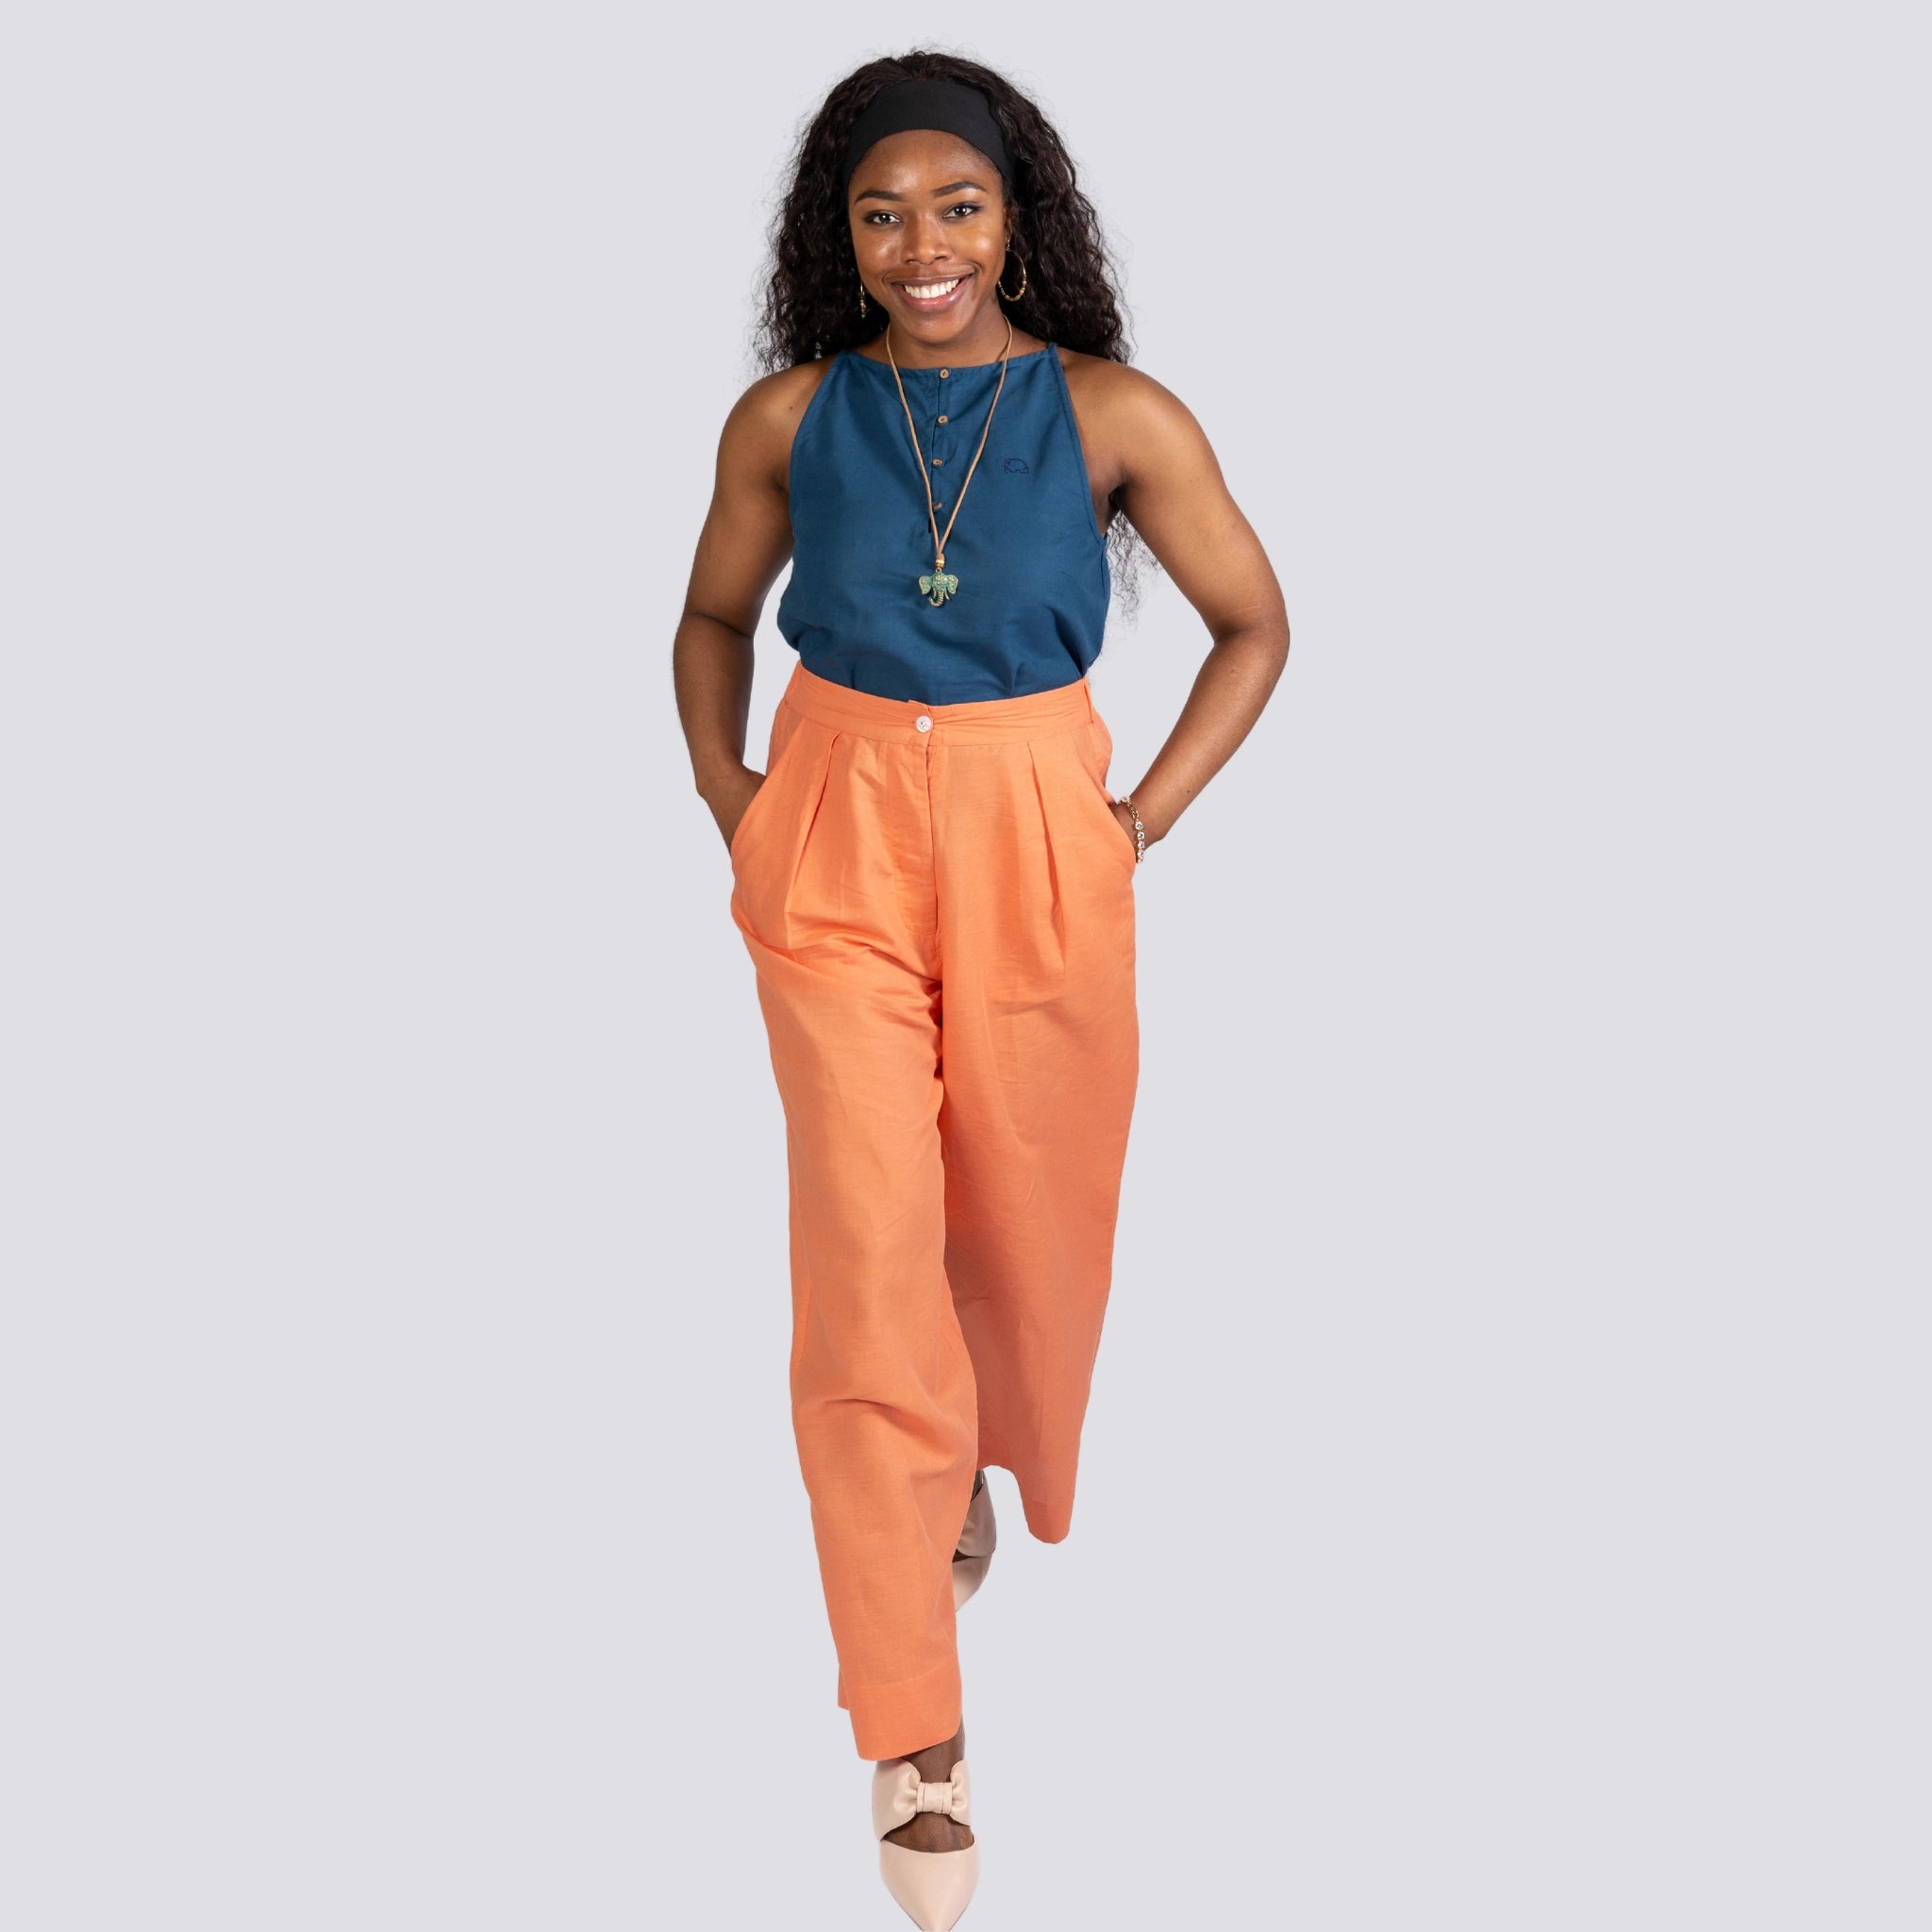 A smiling woman standing confidently, wearing a Karee Indigo Twilight Halter Cami Top For Women, orange trousers, and beige heels, on a grey background.